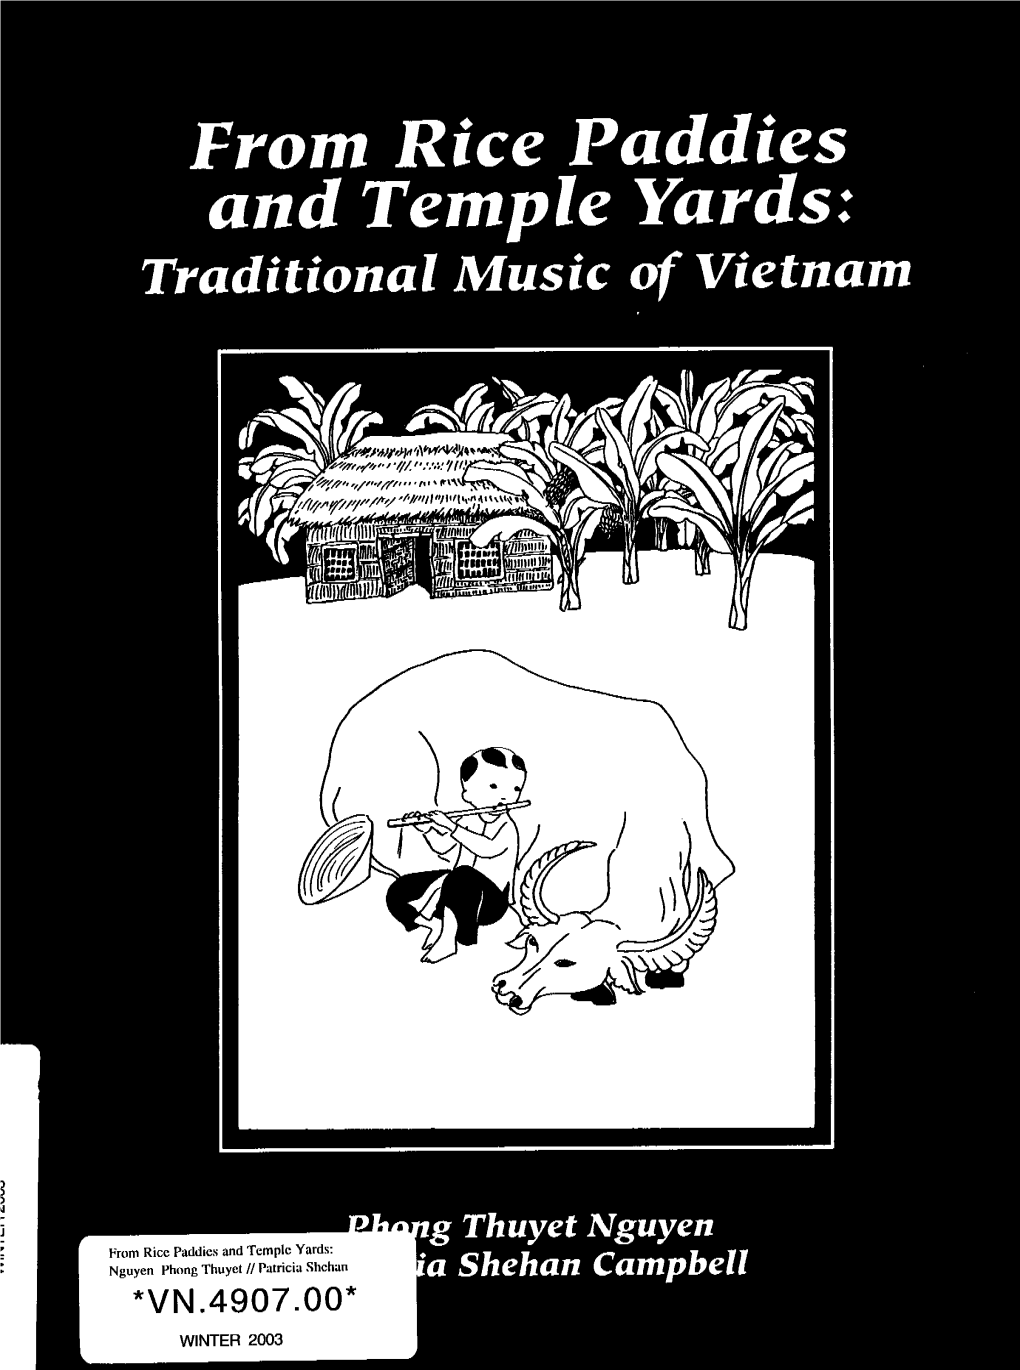 Traditional Music of Vietnam from Rice Paddies and Temple Yards: Traditional Music of Vietnam